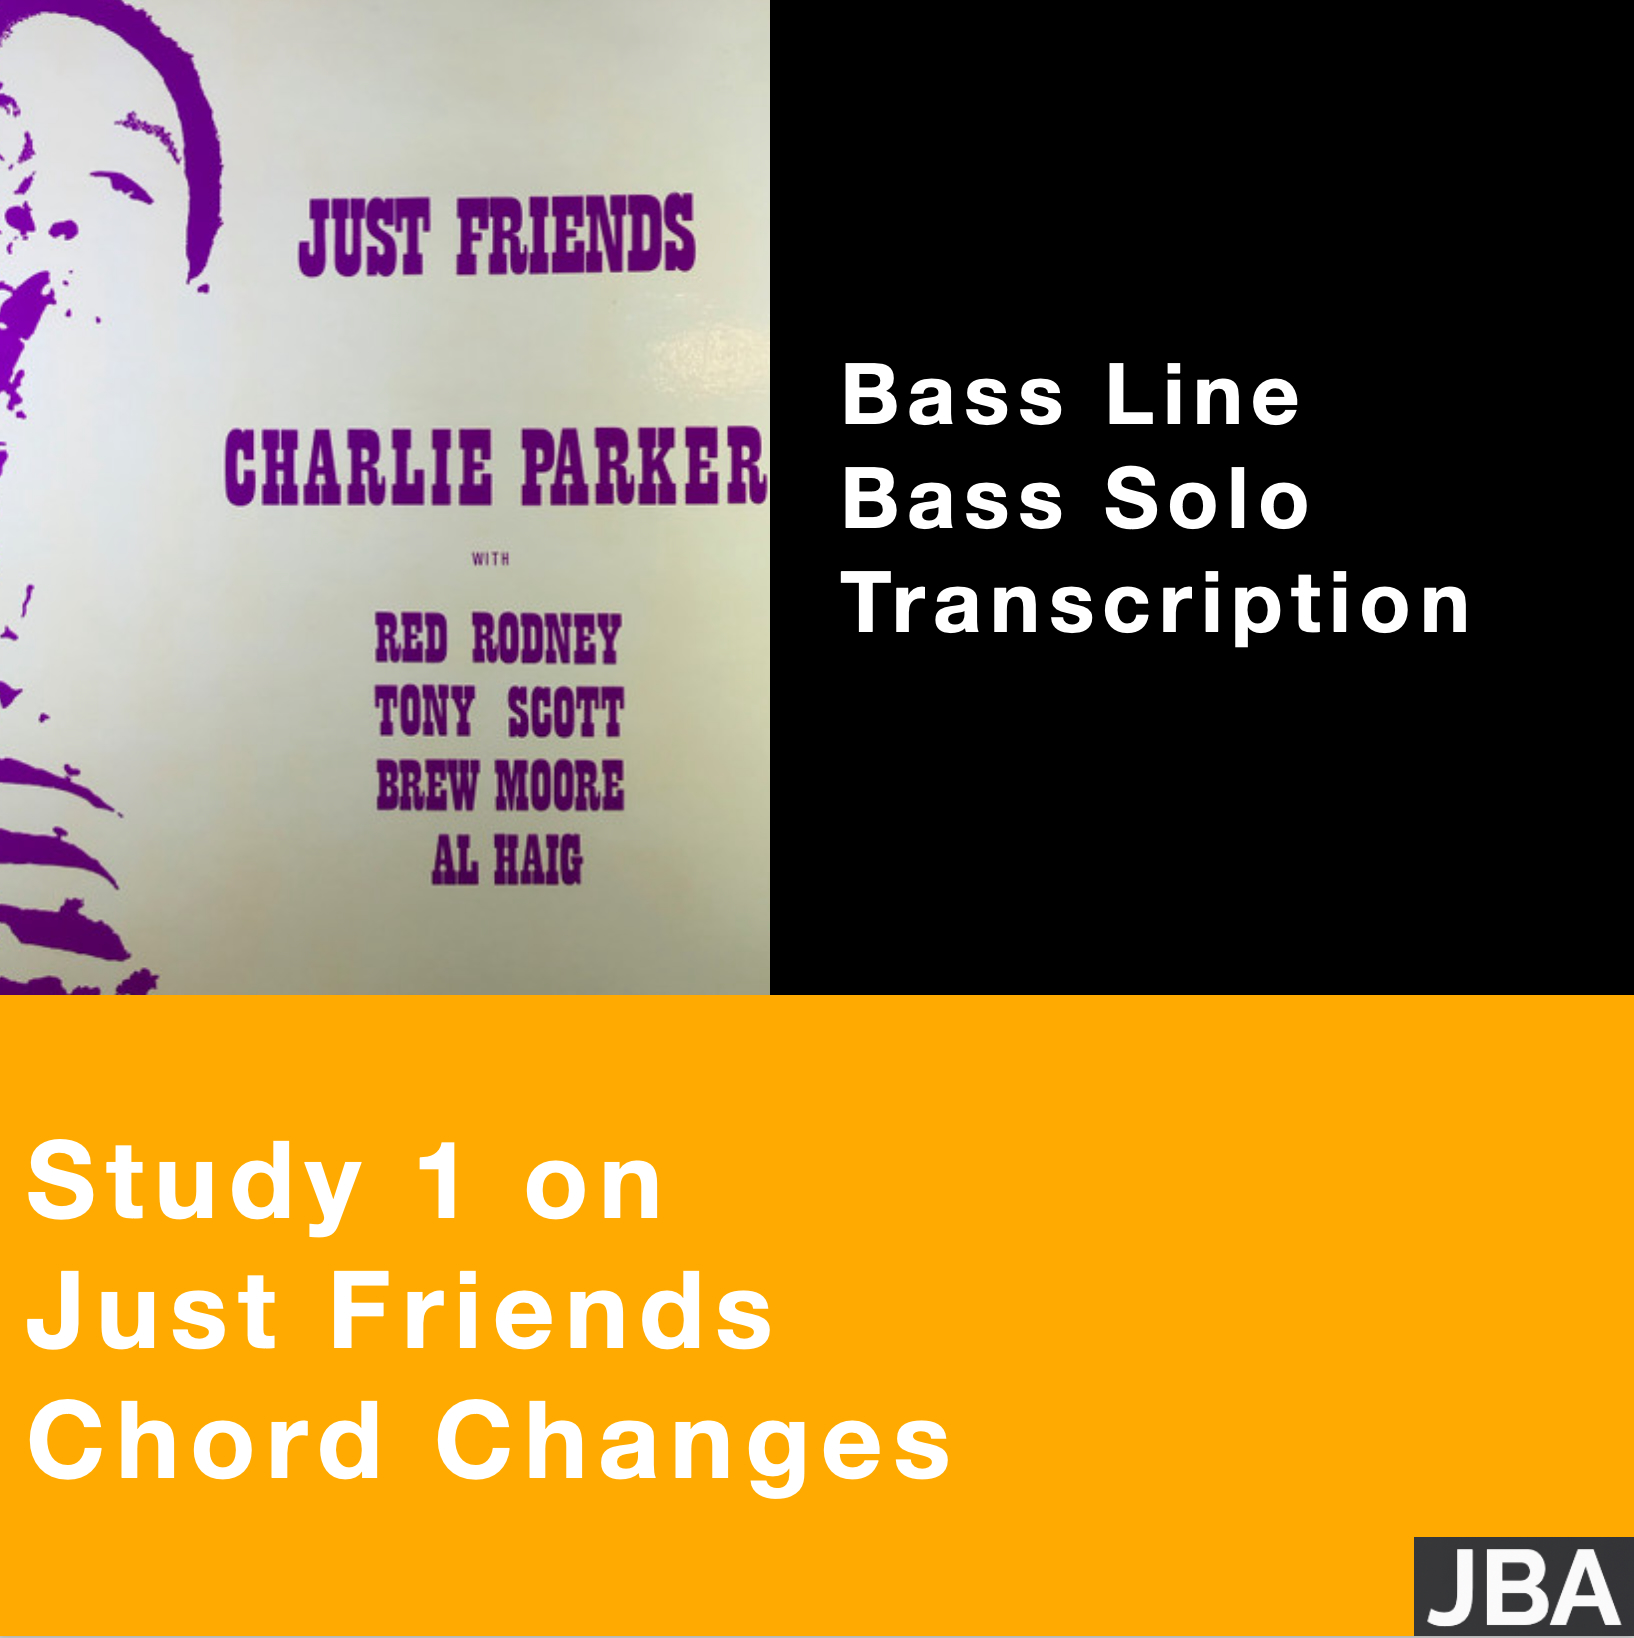 Study 1 on Just Friends chord changes